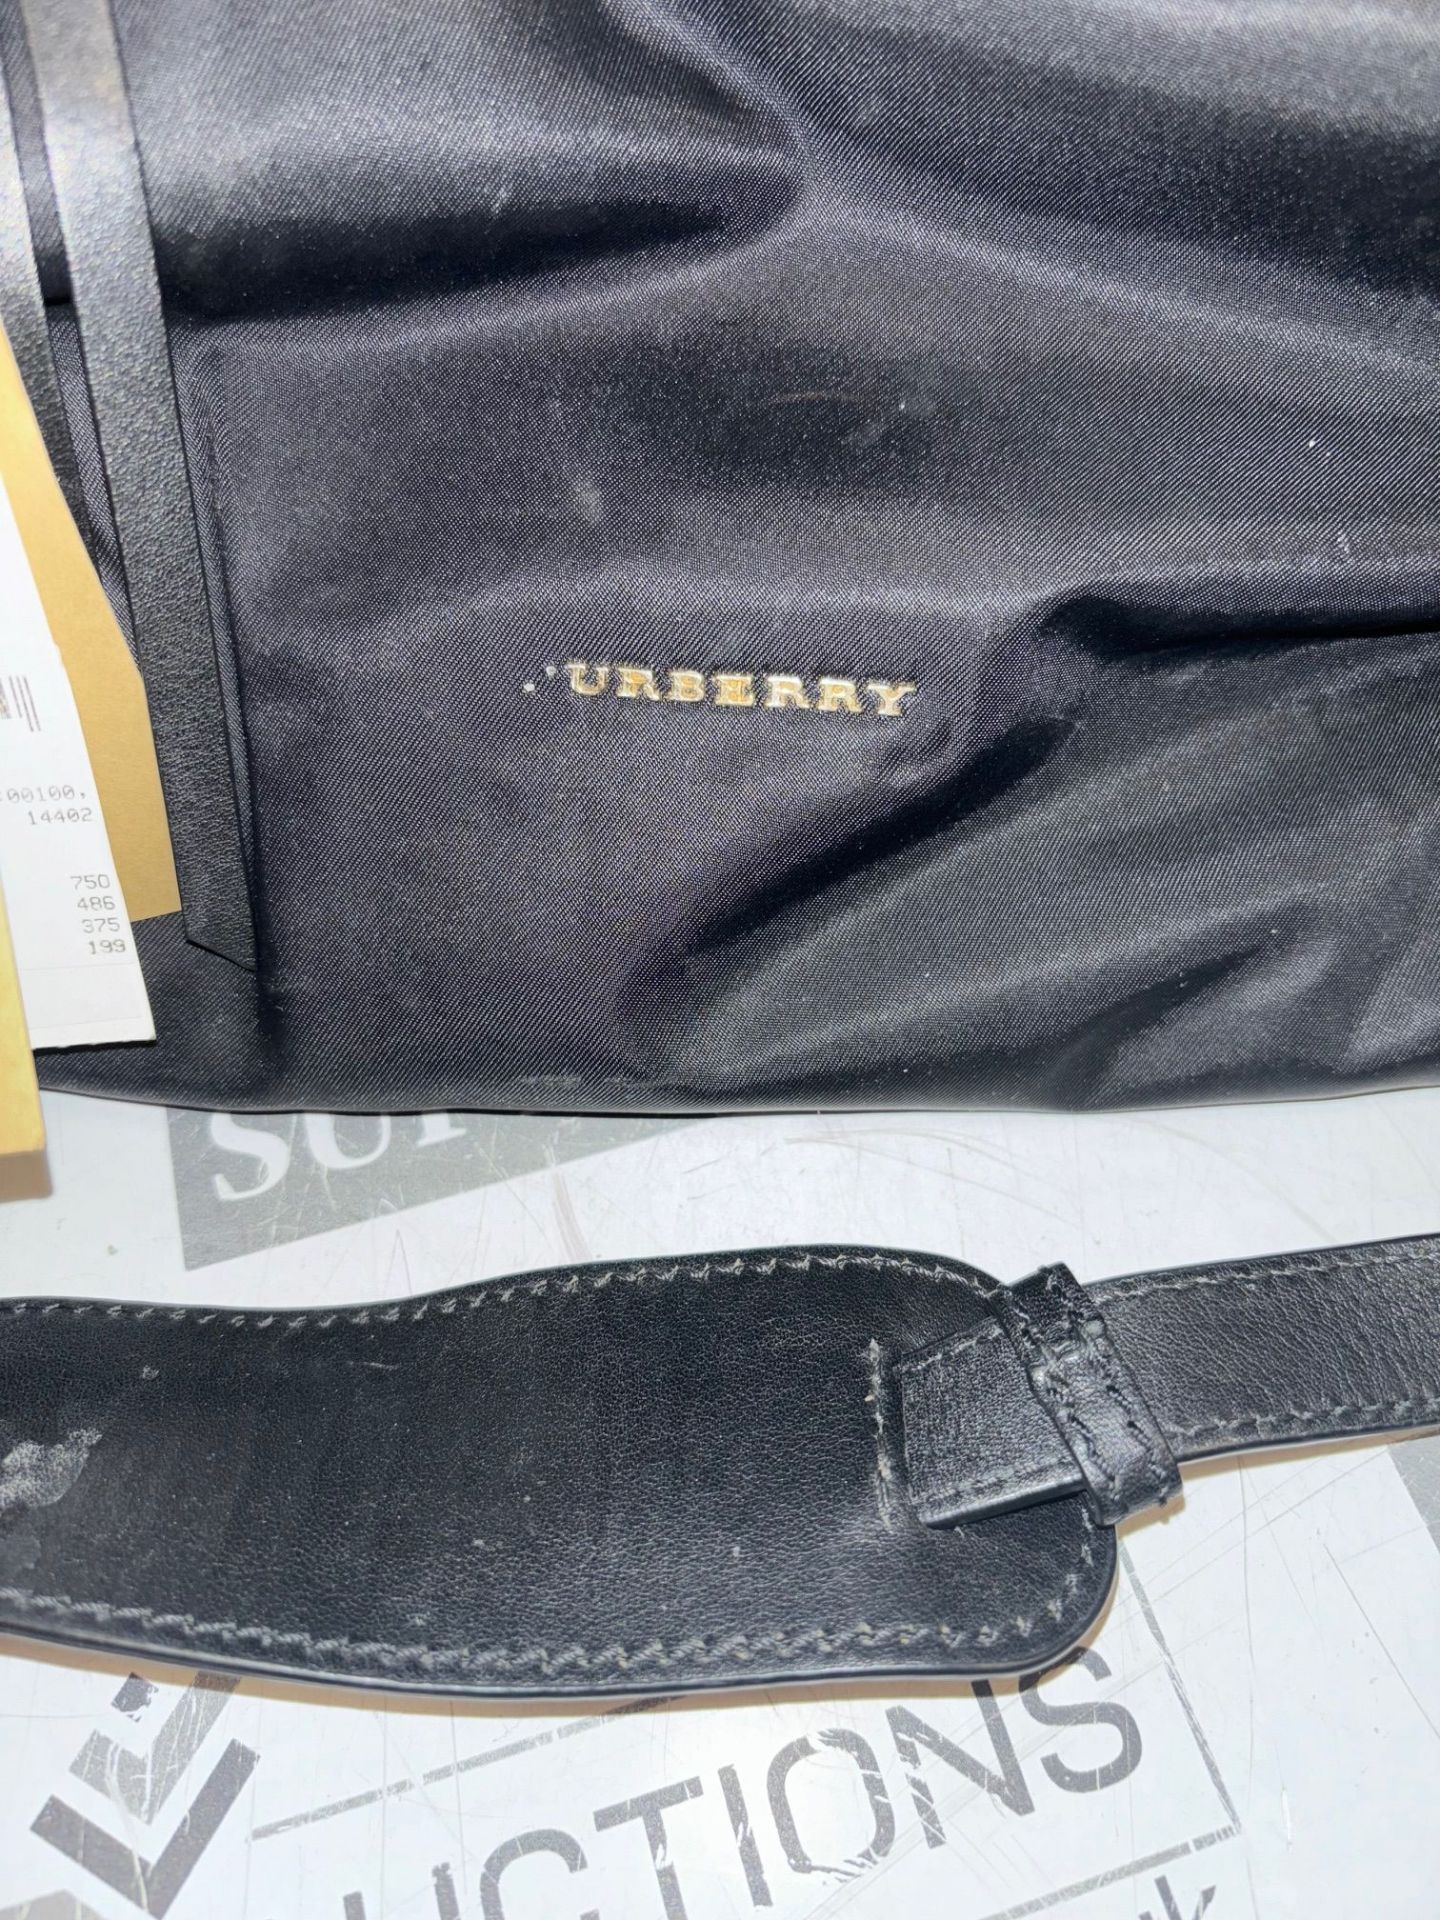 Genuine Burberry black nylon diaper tote, includes changing mat. - Image 4 of 8